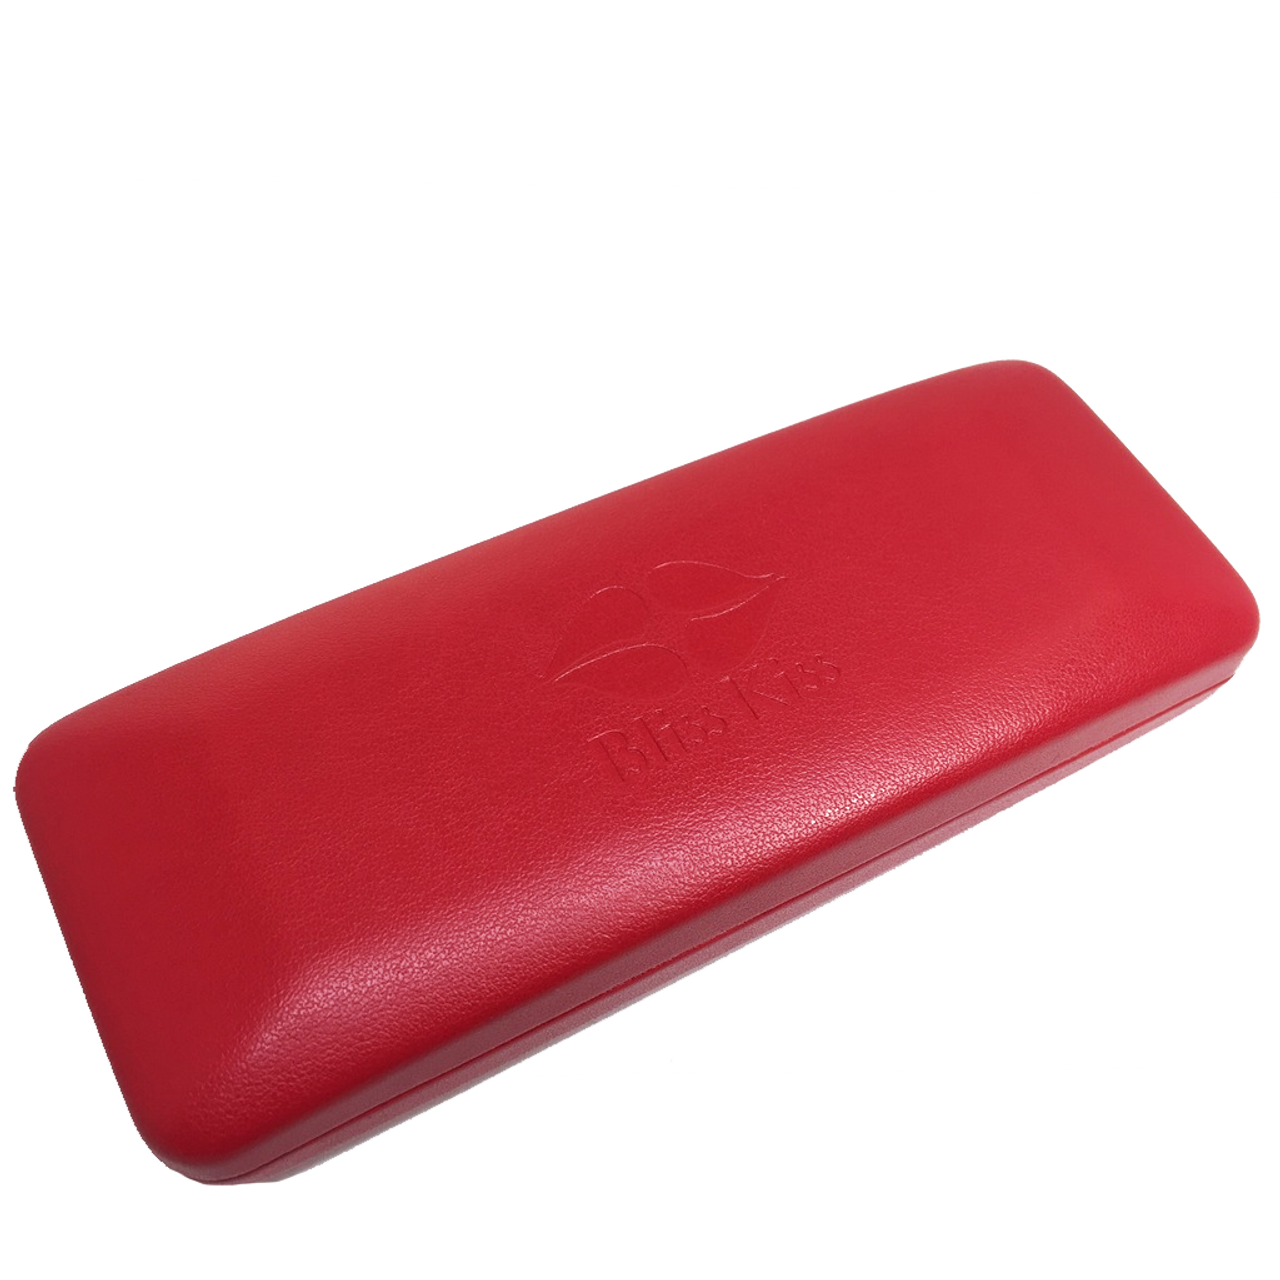 Stylish Bliss Kiss™ Carrying Case - Keep all your tools safely in one spot. Fashionable, portable, durable. Your Bliss Kiss™ Carrying Case is a gorgeous red faux leather with the Bliss Kiss™ logo embossed on top. You'll quickly wonder how you ever lived without it! Dimensions: 6" wide x 1" tall x 2.25" deep.